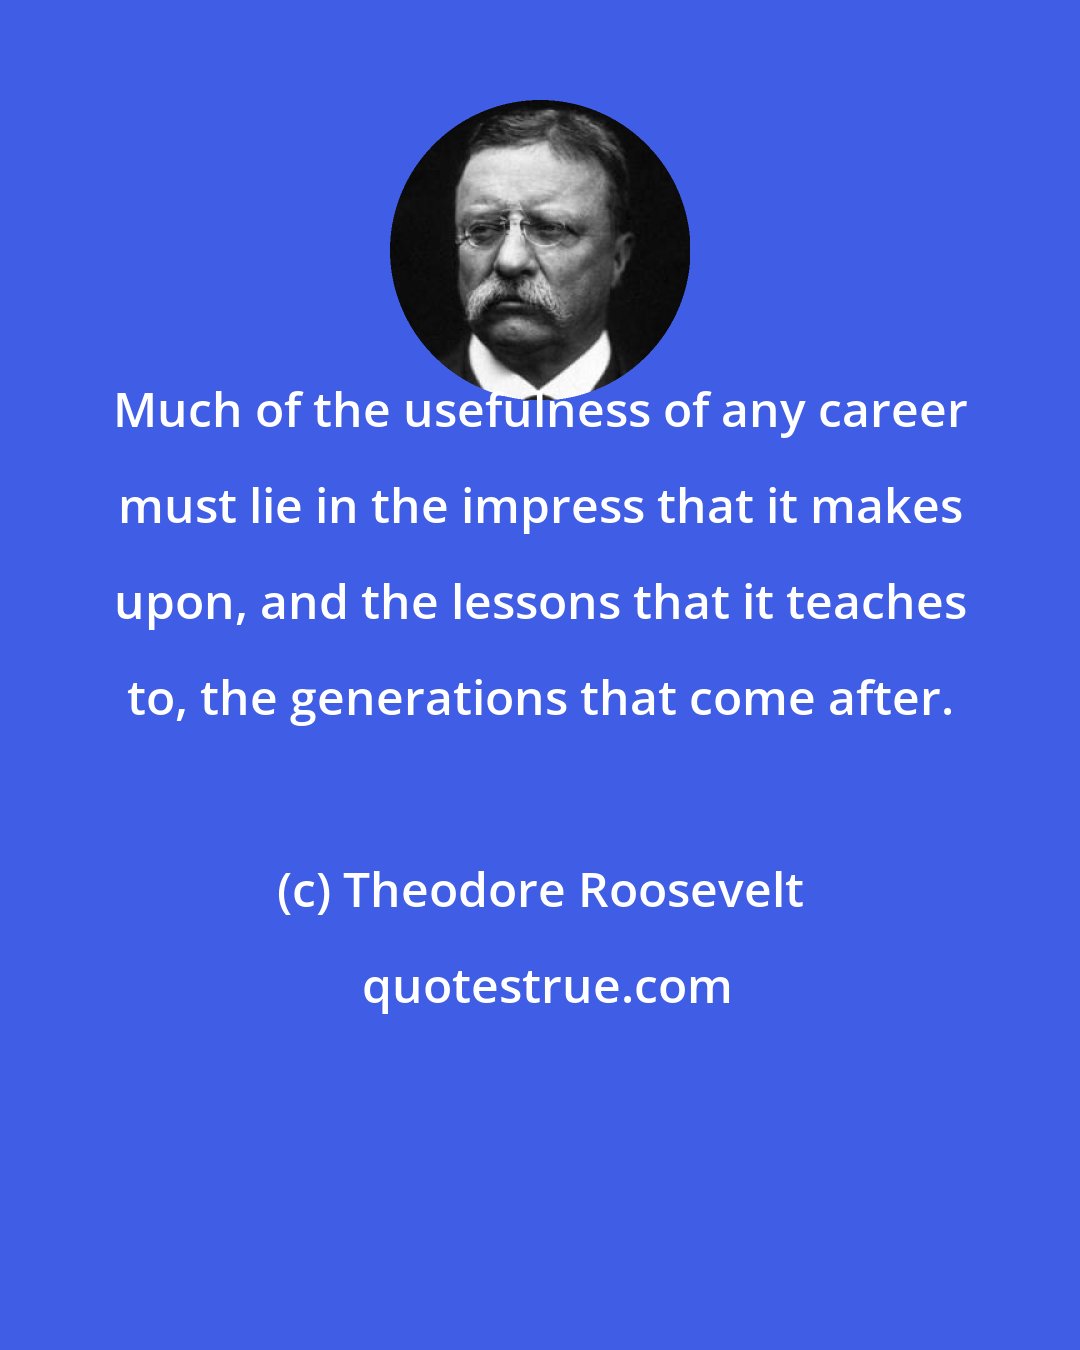 Theodore Roosevelt: Much of the usefulness of any career must lie in the impress that it makes upon, and the lessons that it teaches to, the generations that come after.